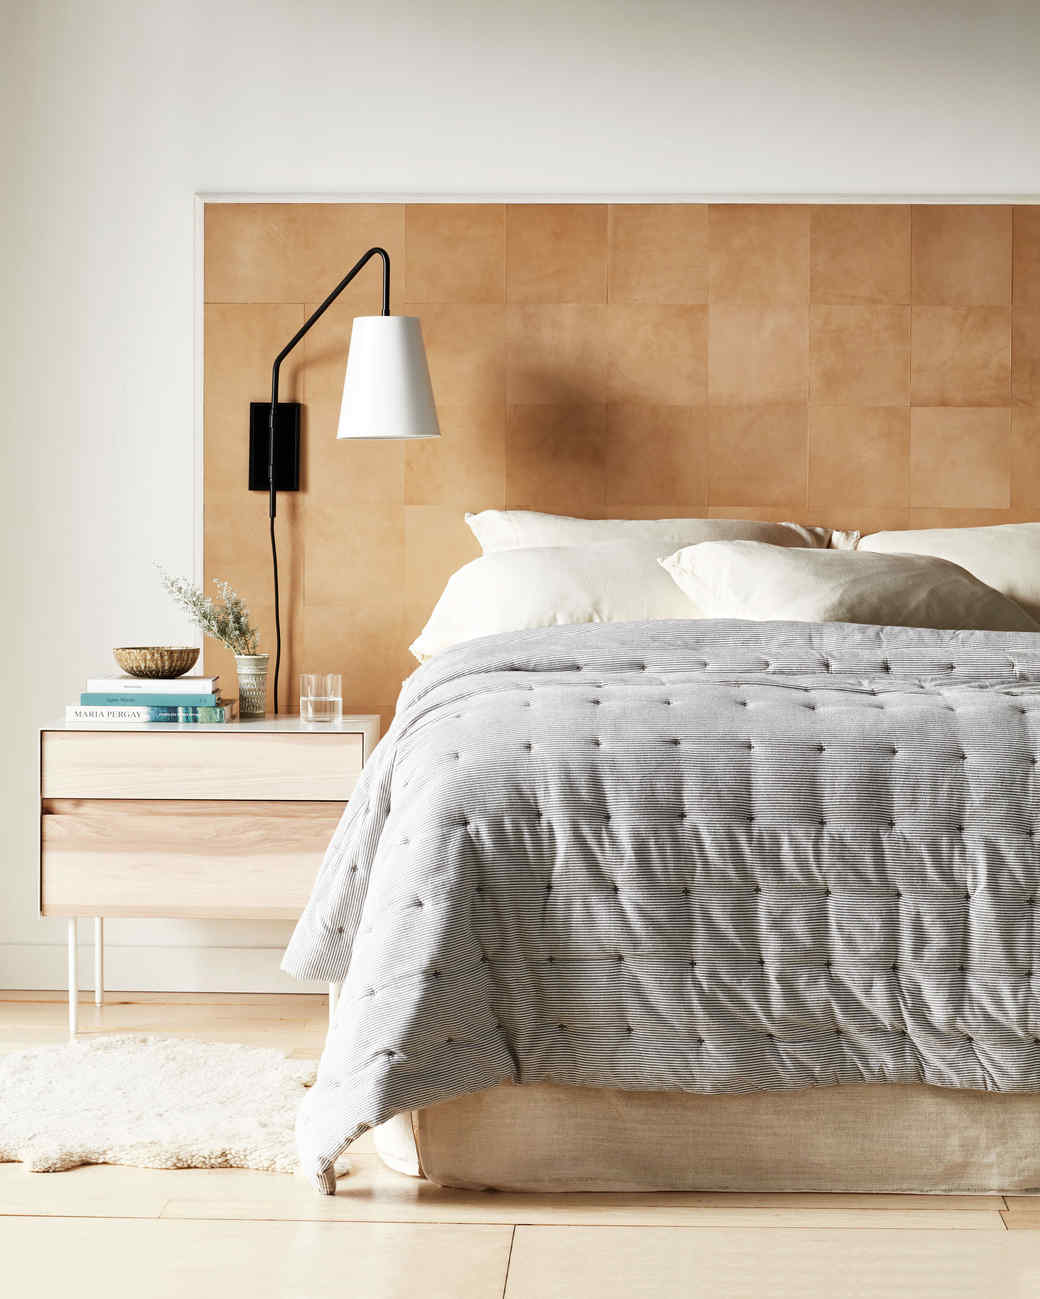 11 DIY Headboard Ideas to Give Your Bed a Boost | Martha ...